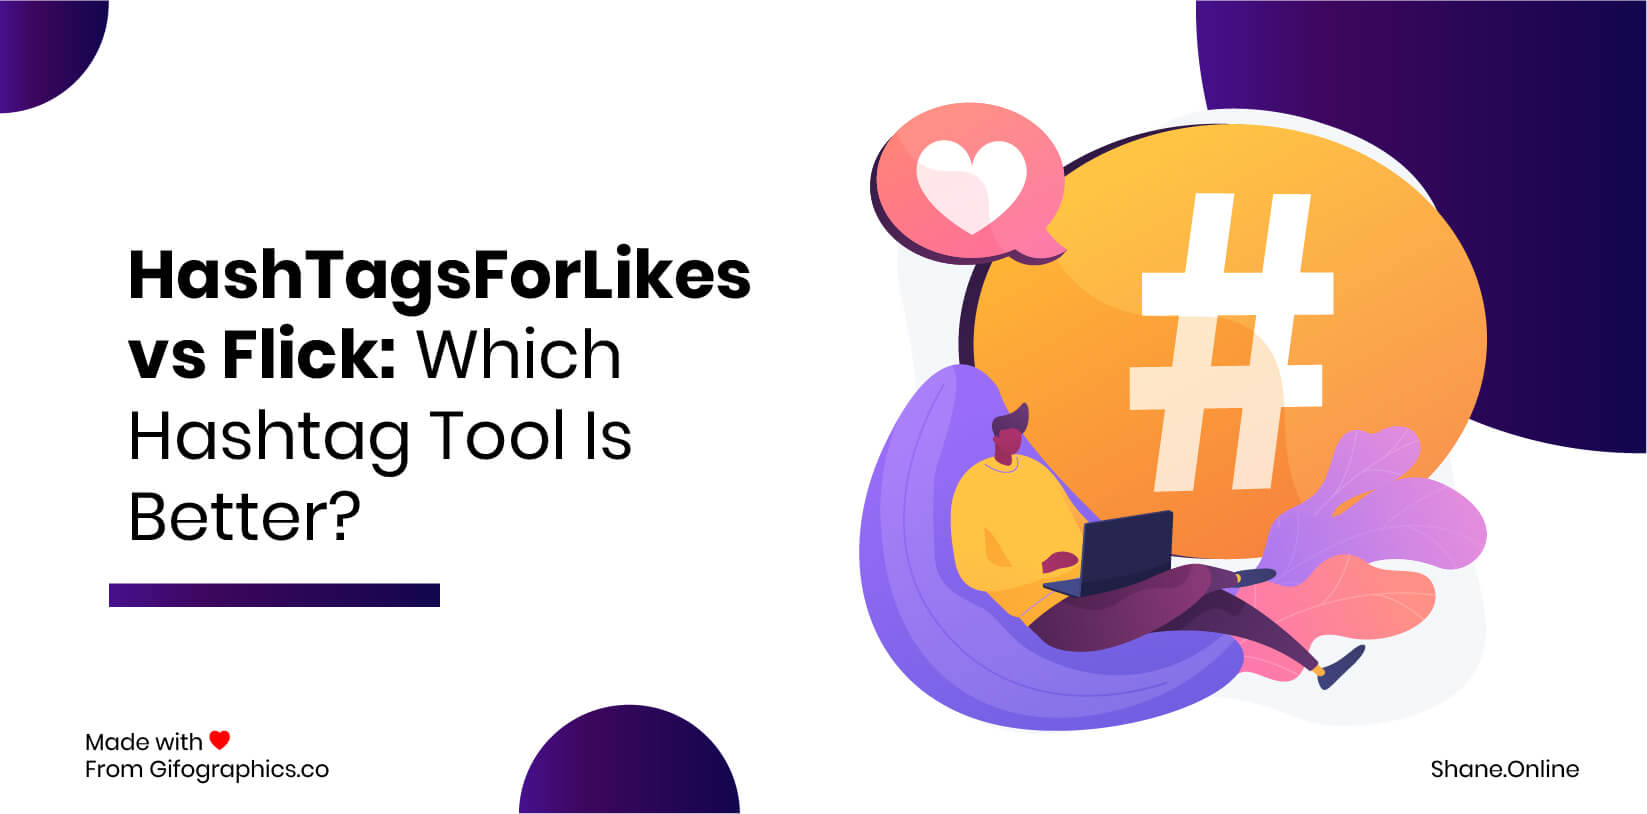 HashTagsForLikes vs Flick - Which Hashtag Tool Is Better